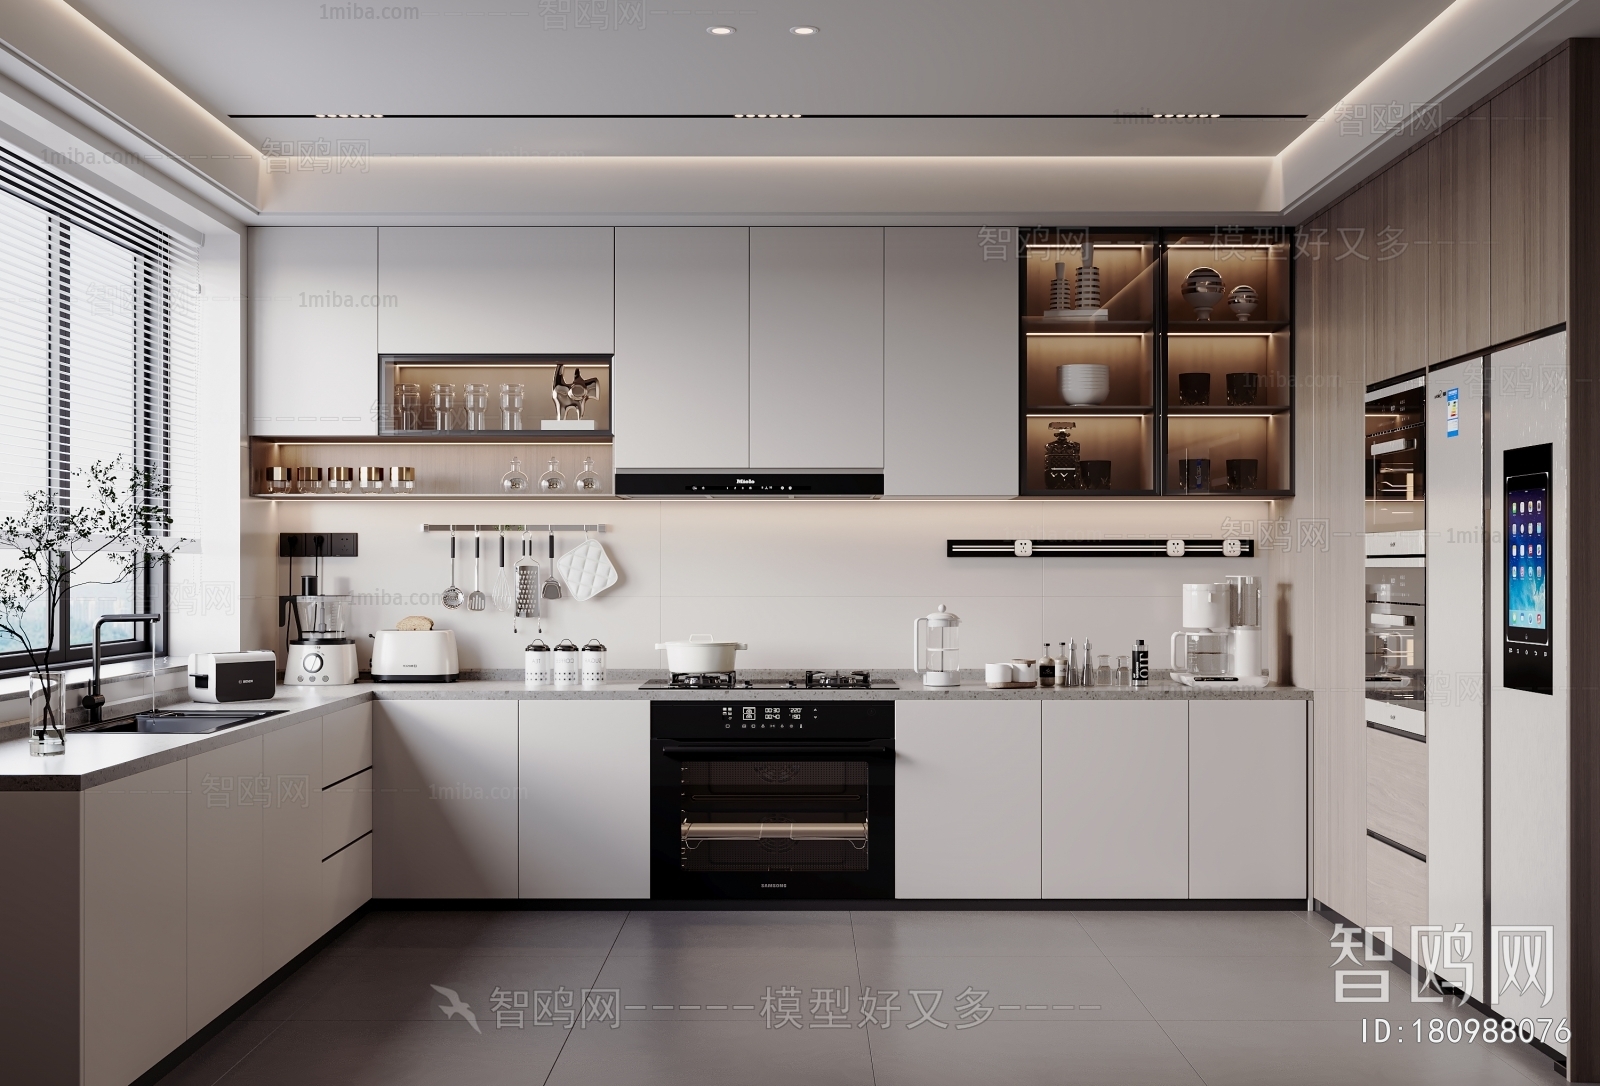 Modern The Kitchen sketchup Model Download - Model ID.180988076 | 1miba